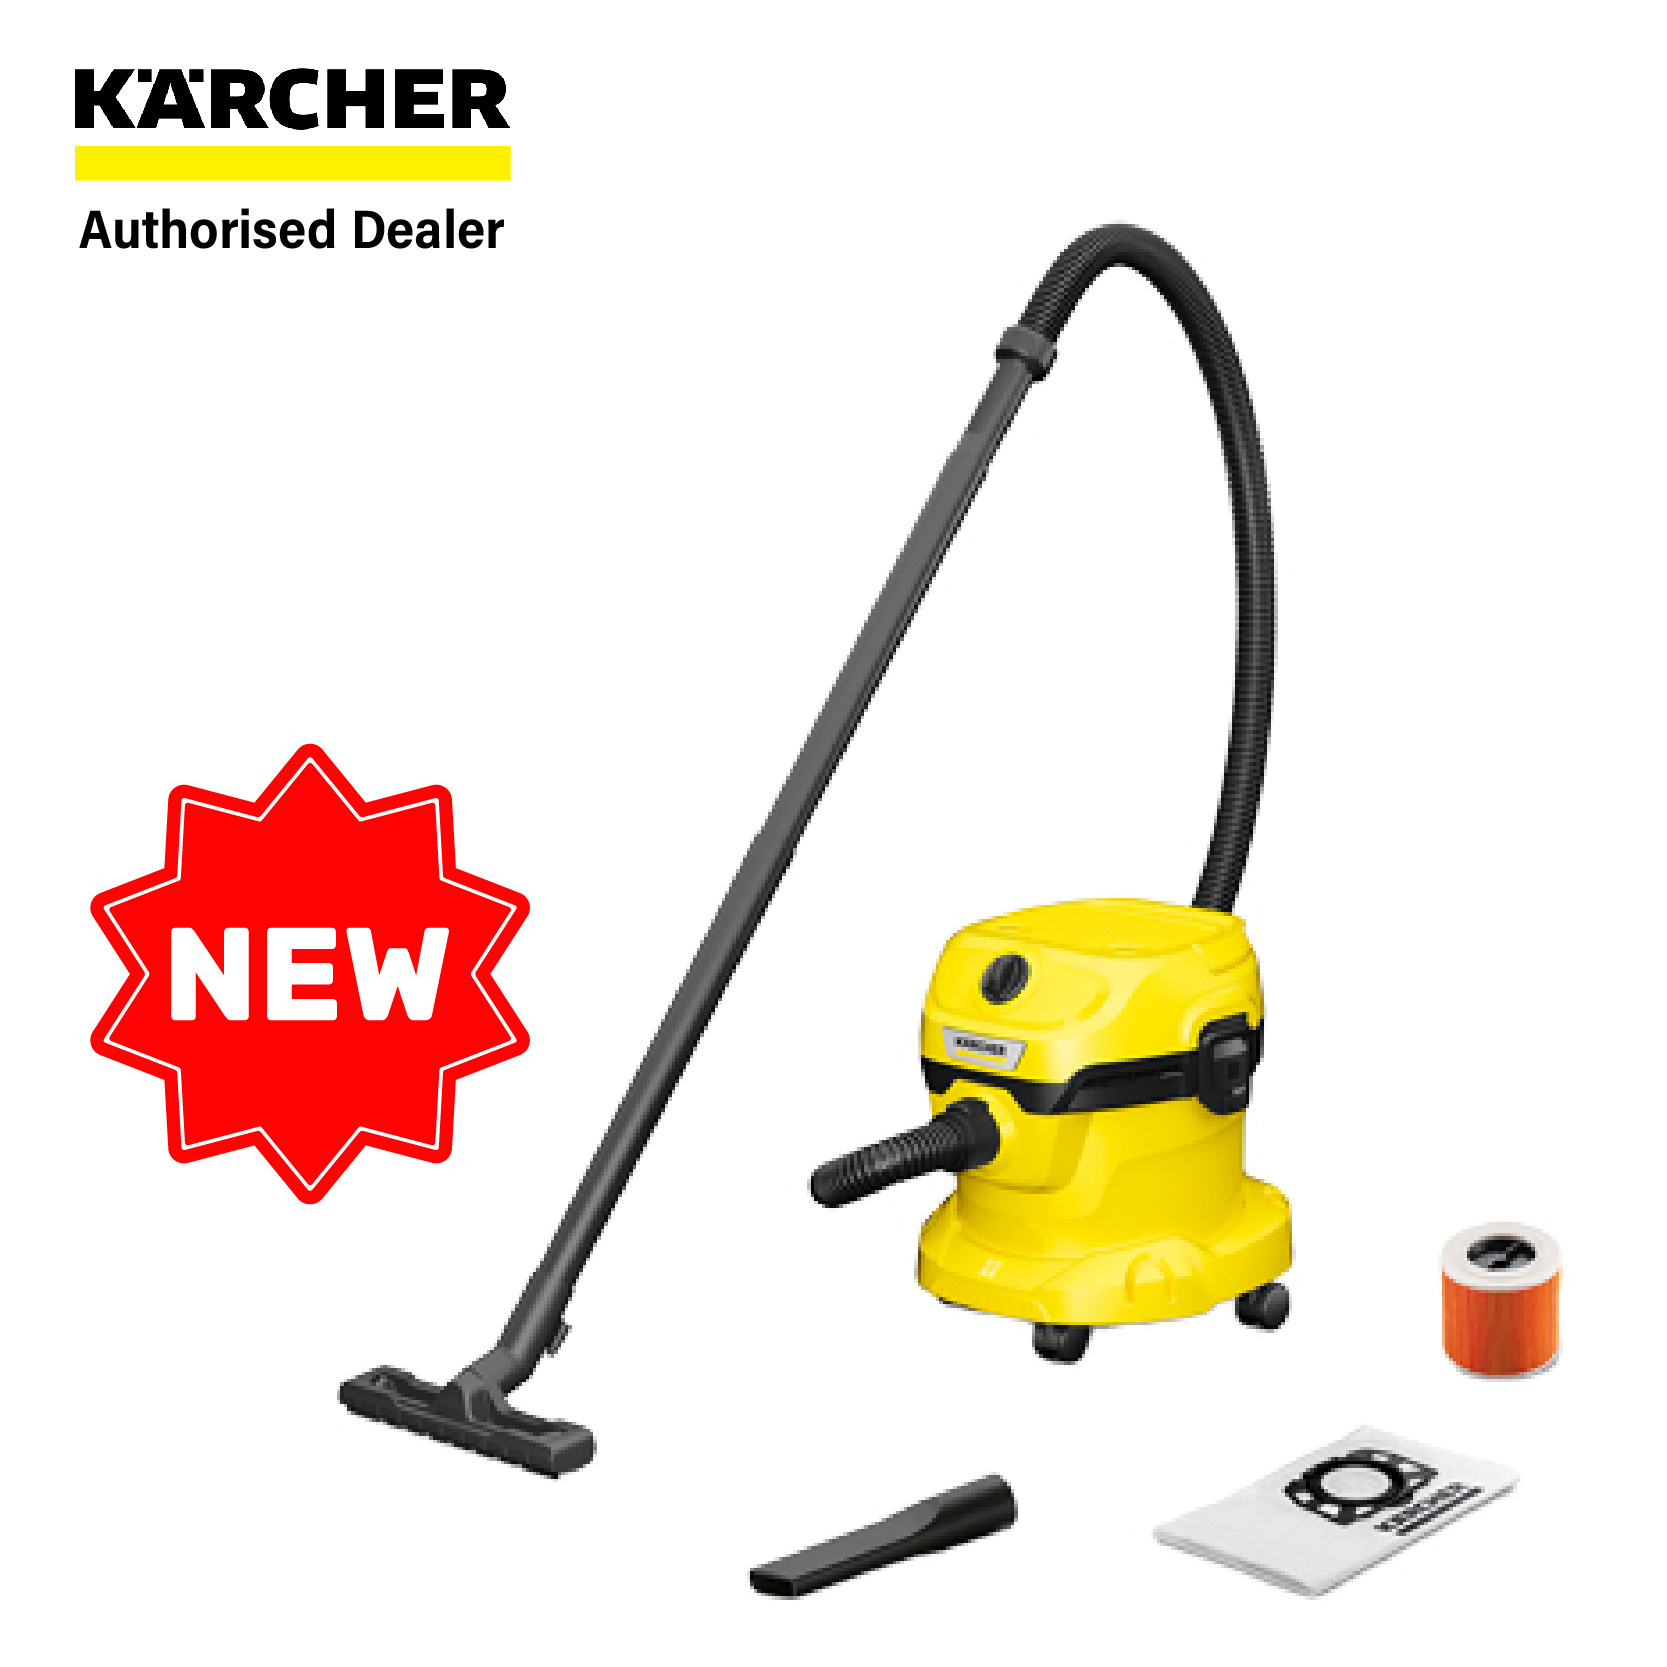 Wd2 Karcher Vacuum Cleaner, Vacuum Cleaner Karcher 2 Wd